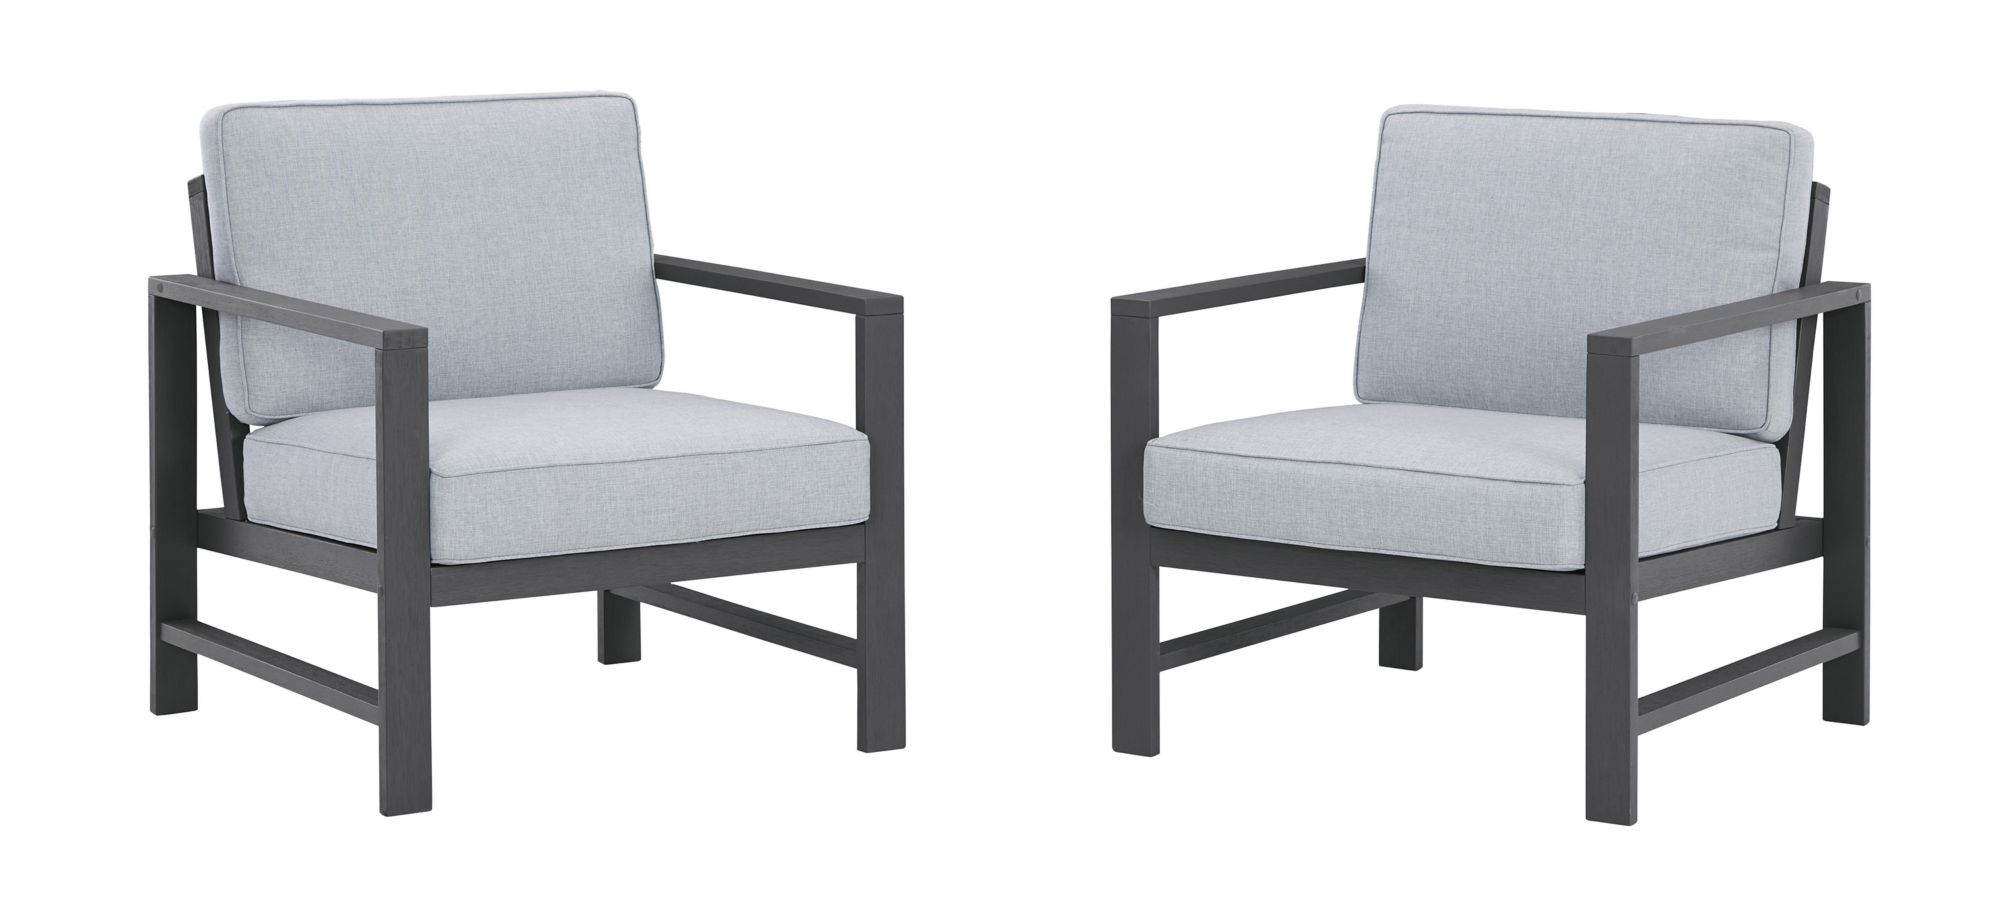 Fynnegan Outdoor Lounge Chair - Set of 2 in Gray by Ashley Express